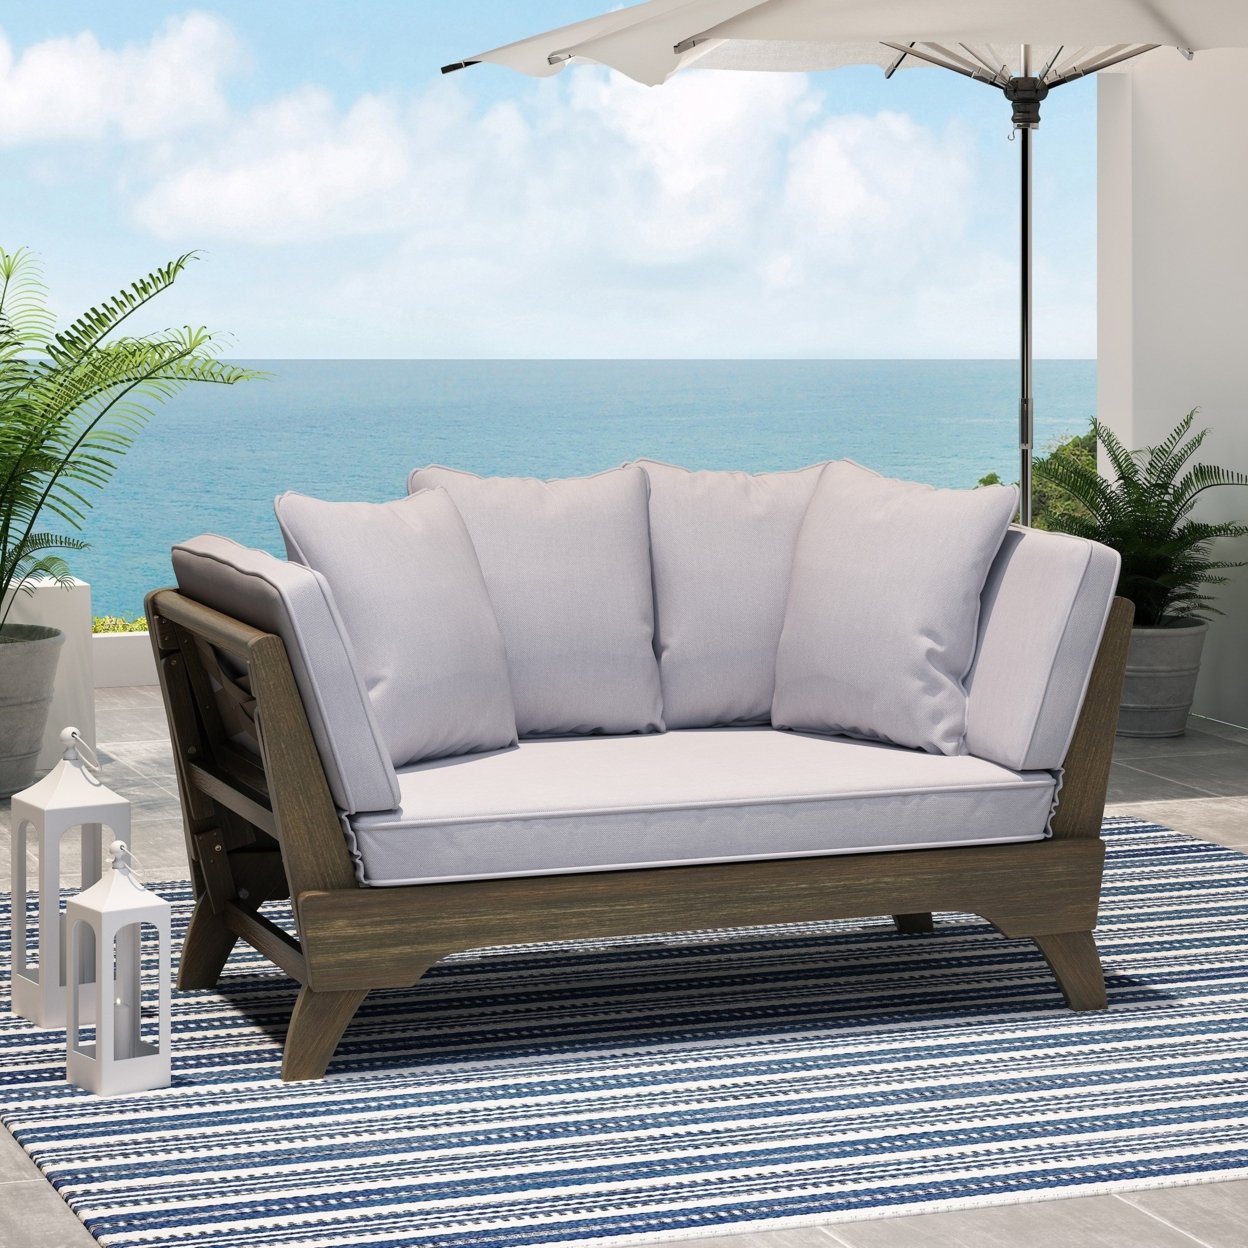 Oceanna Outdoor Acacia Wood Expandable Daybed With Water Resistant Cushions - Gray/dark Gray/gray